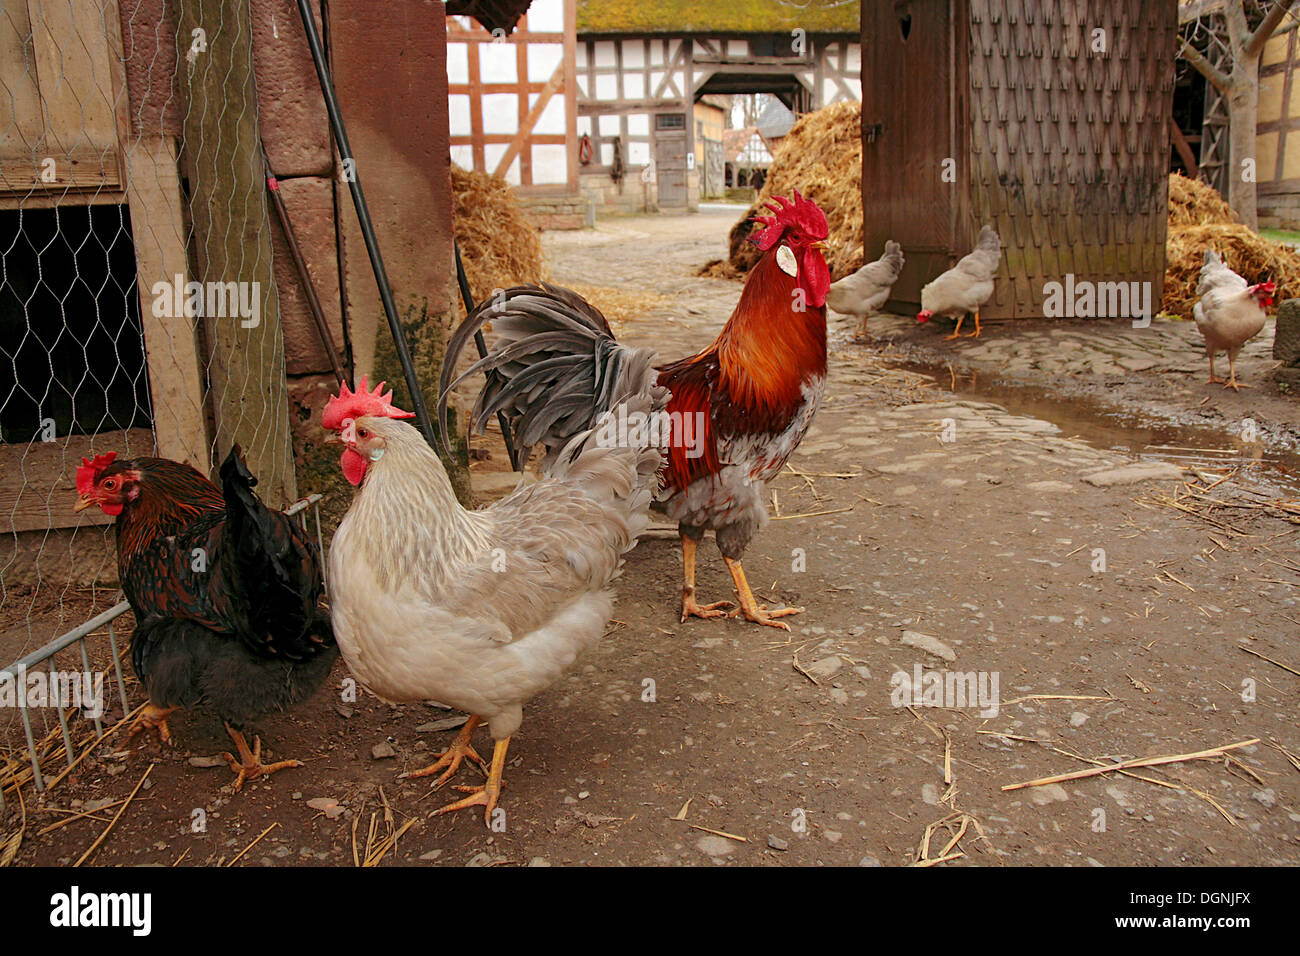 Domestic chicken (Gallus gallus domesticus), free-ranging rooster, cock, and hens at a historic farm with a dung hill Stock Photo